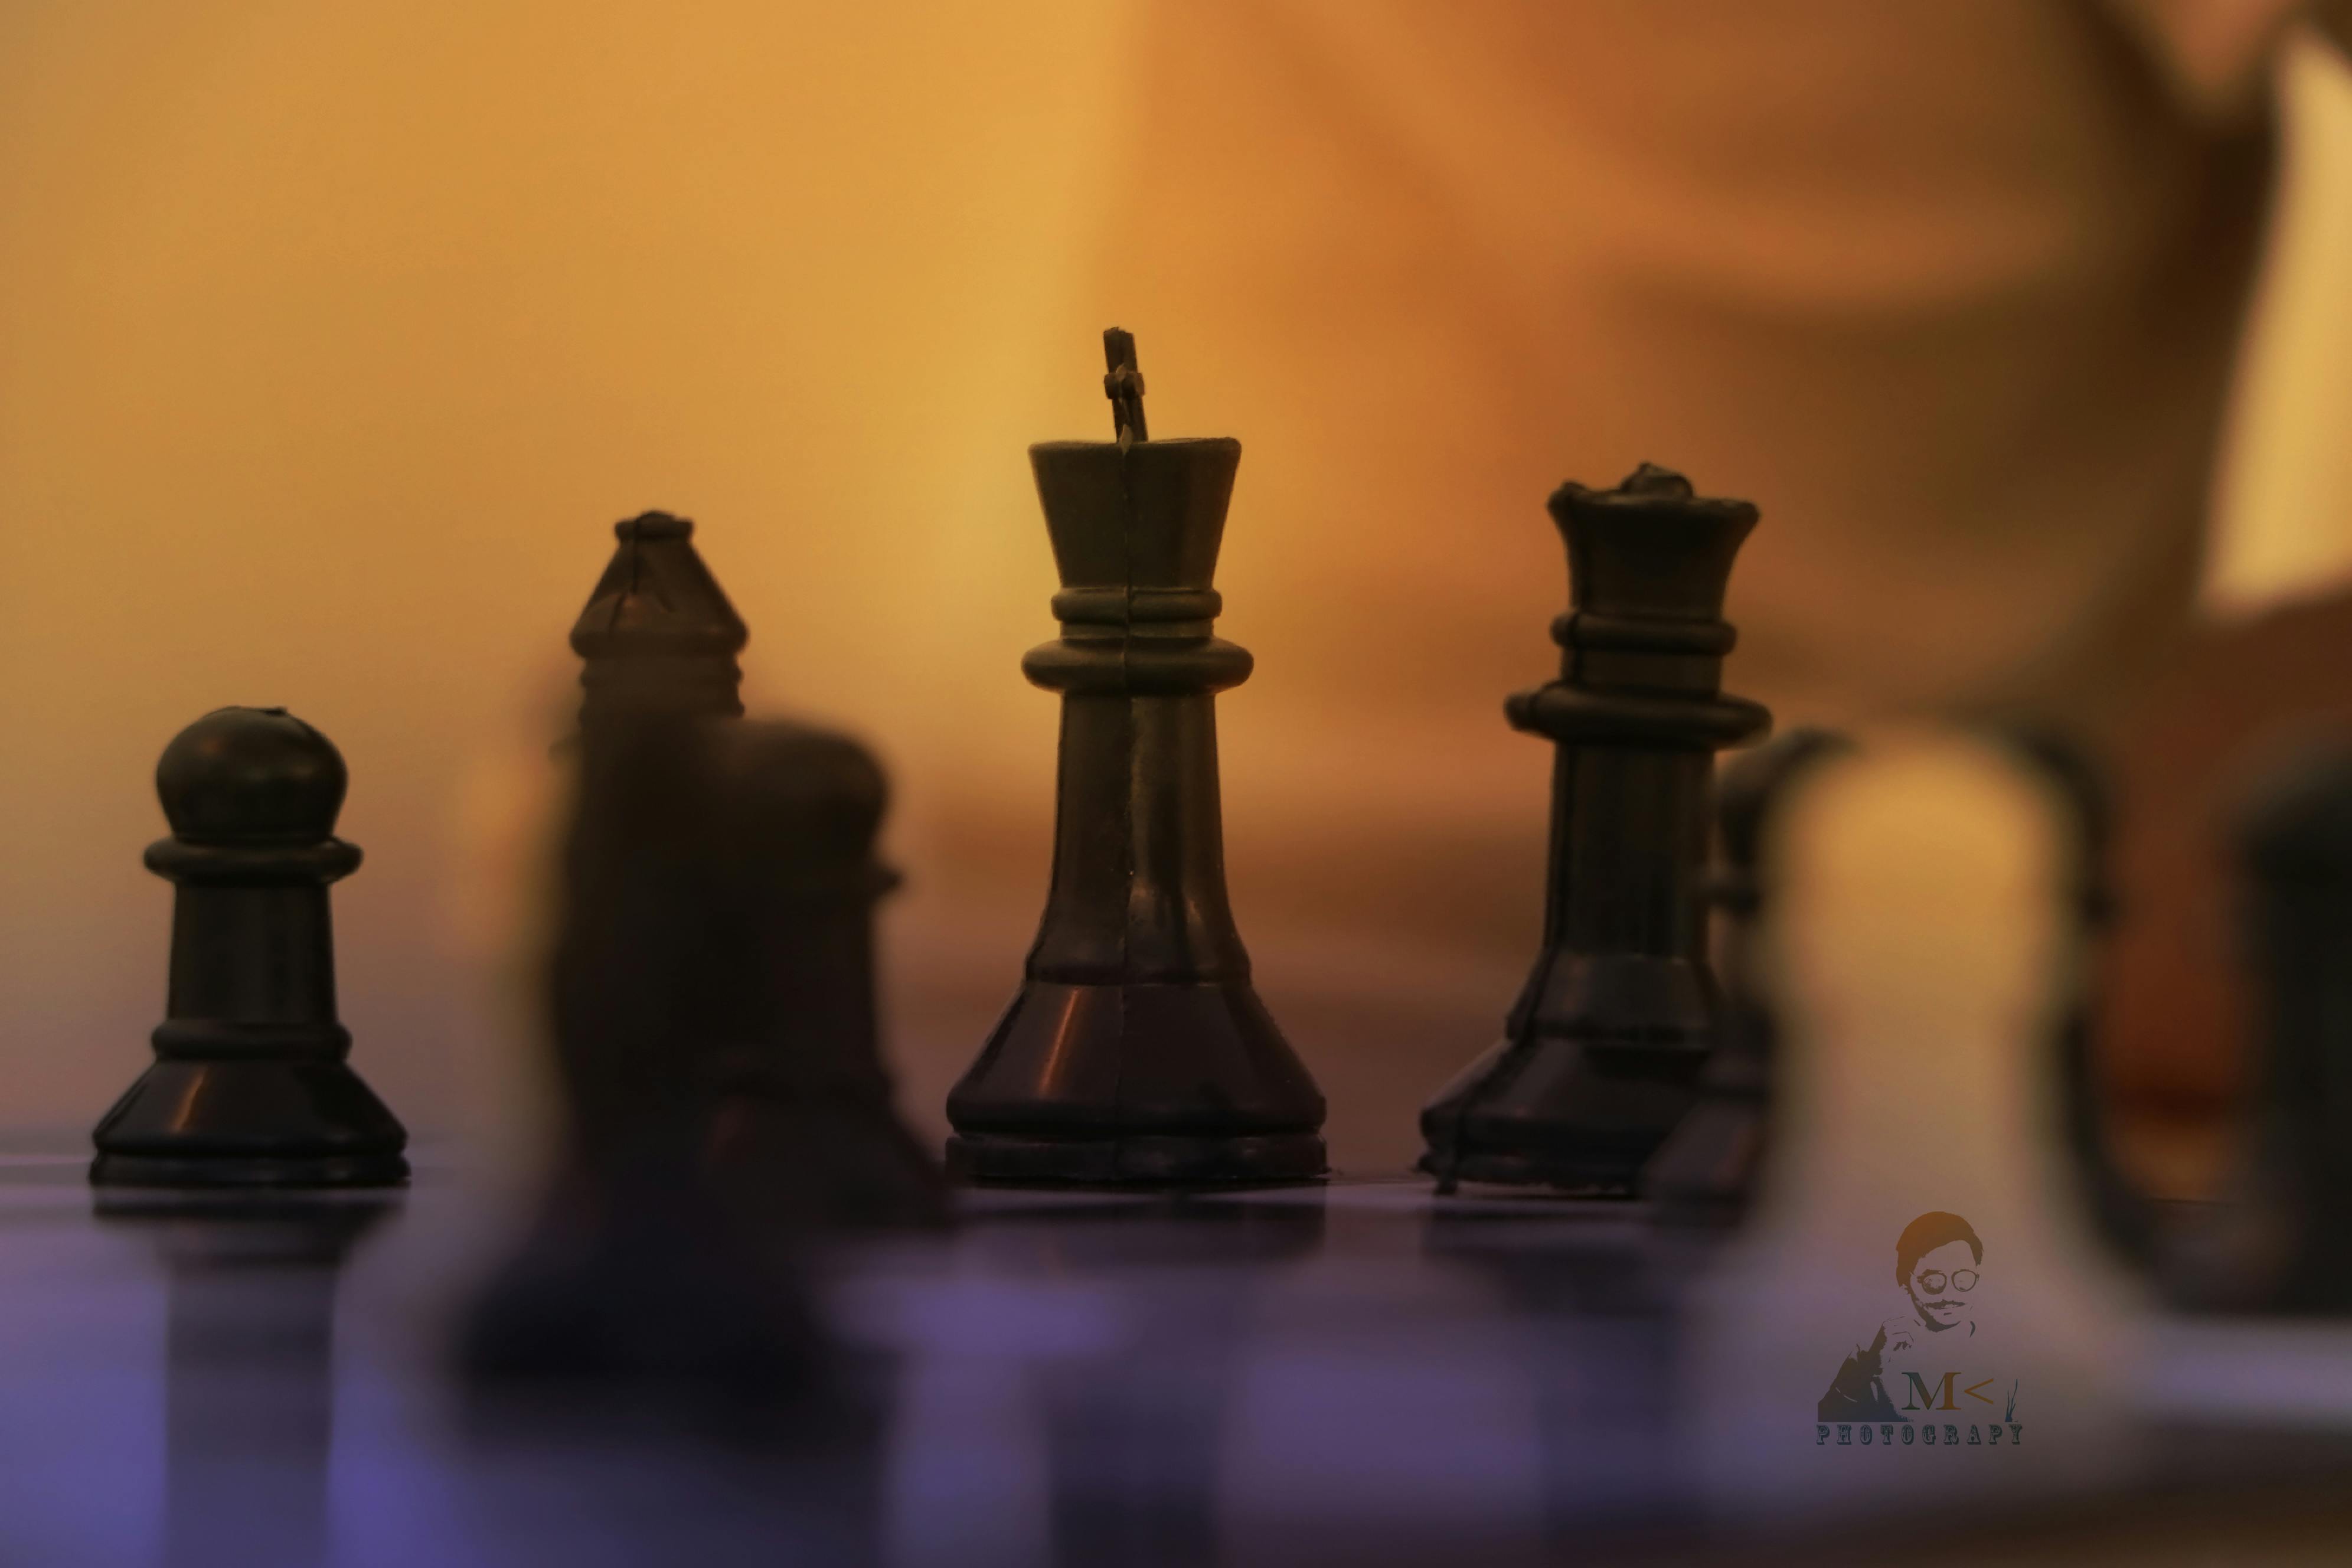 Free stock photo of chess board